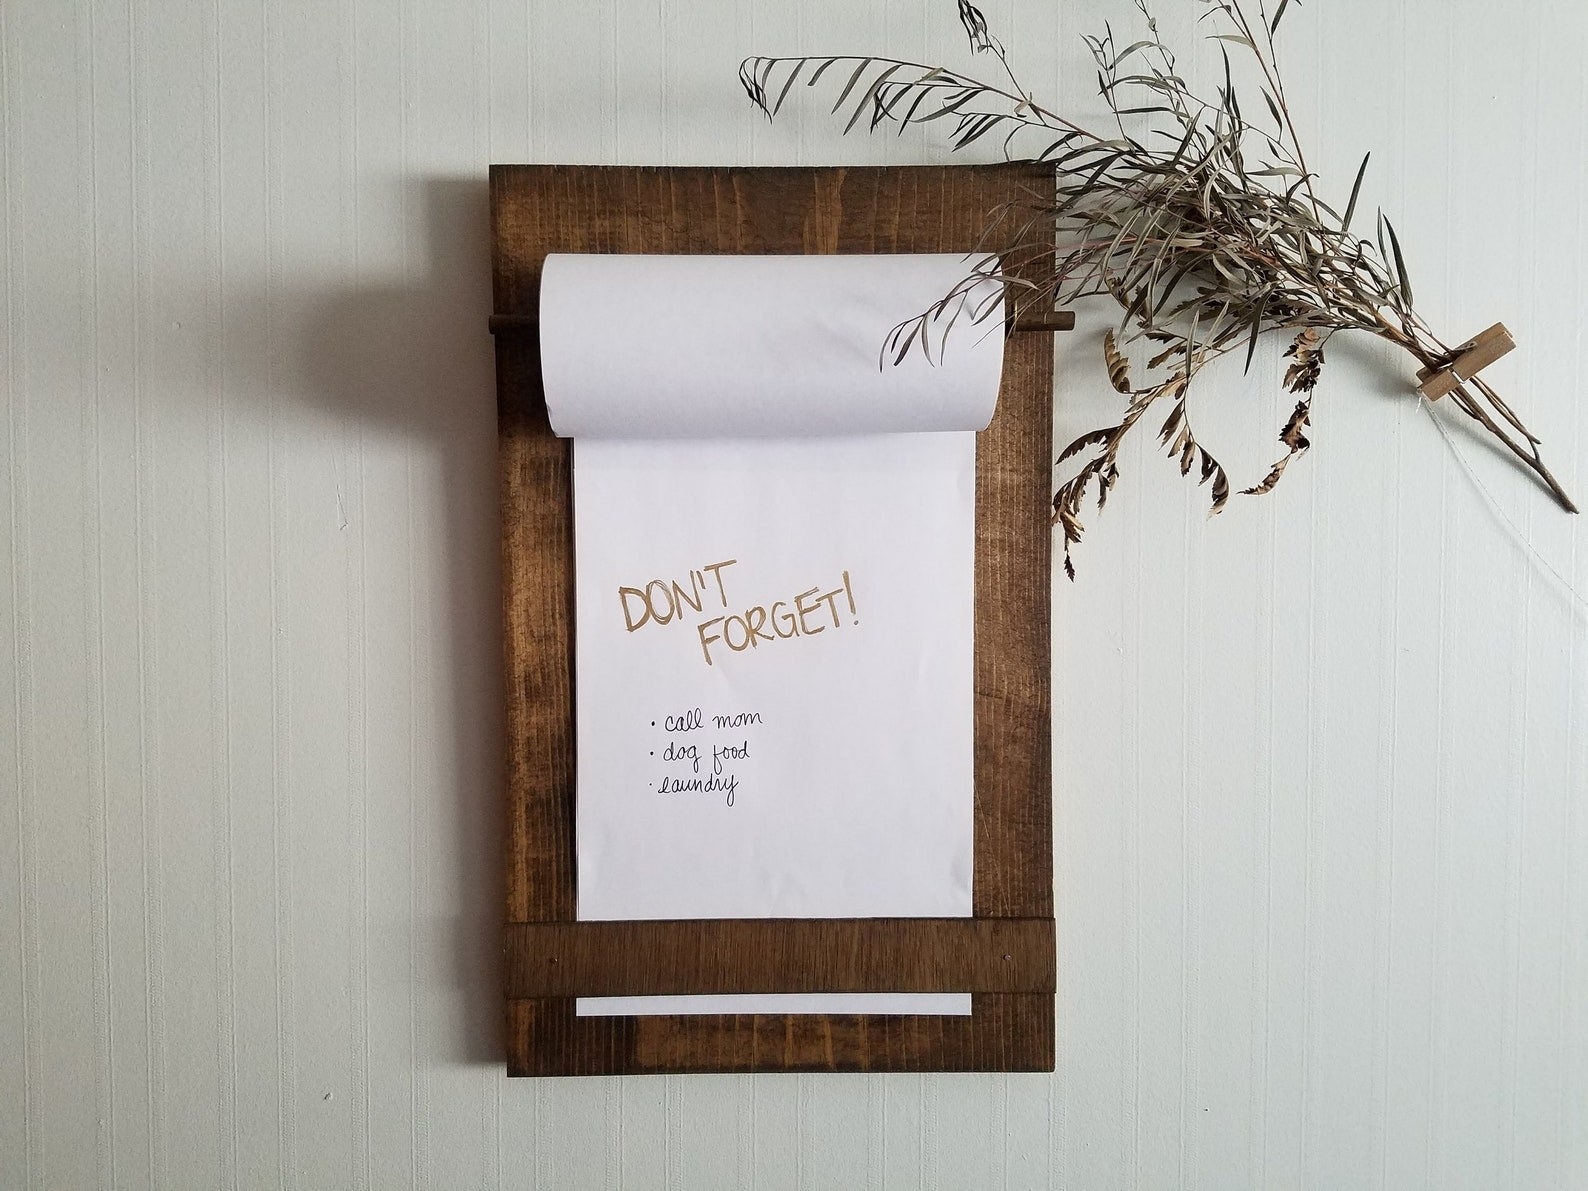 The hanging paper roll holder with don&#x27;t forget list written